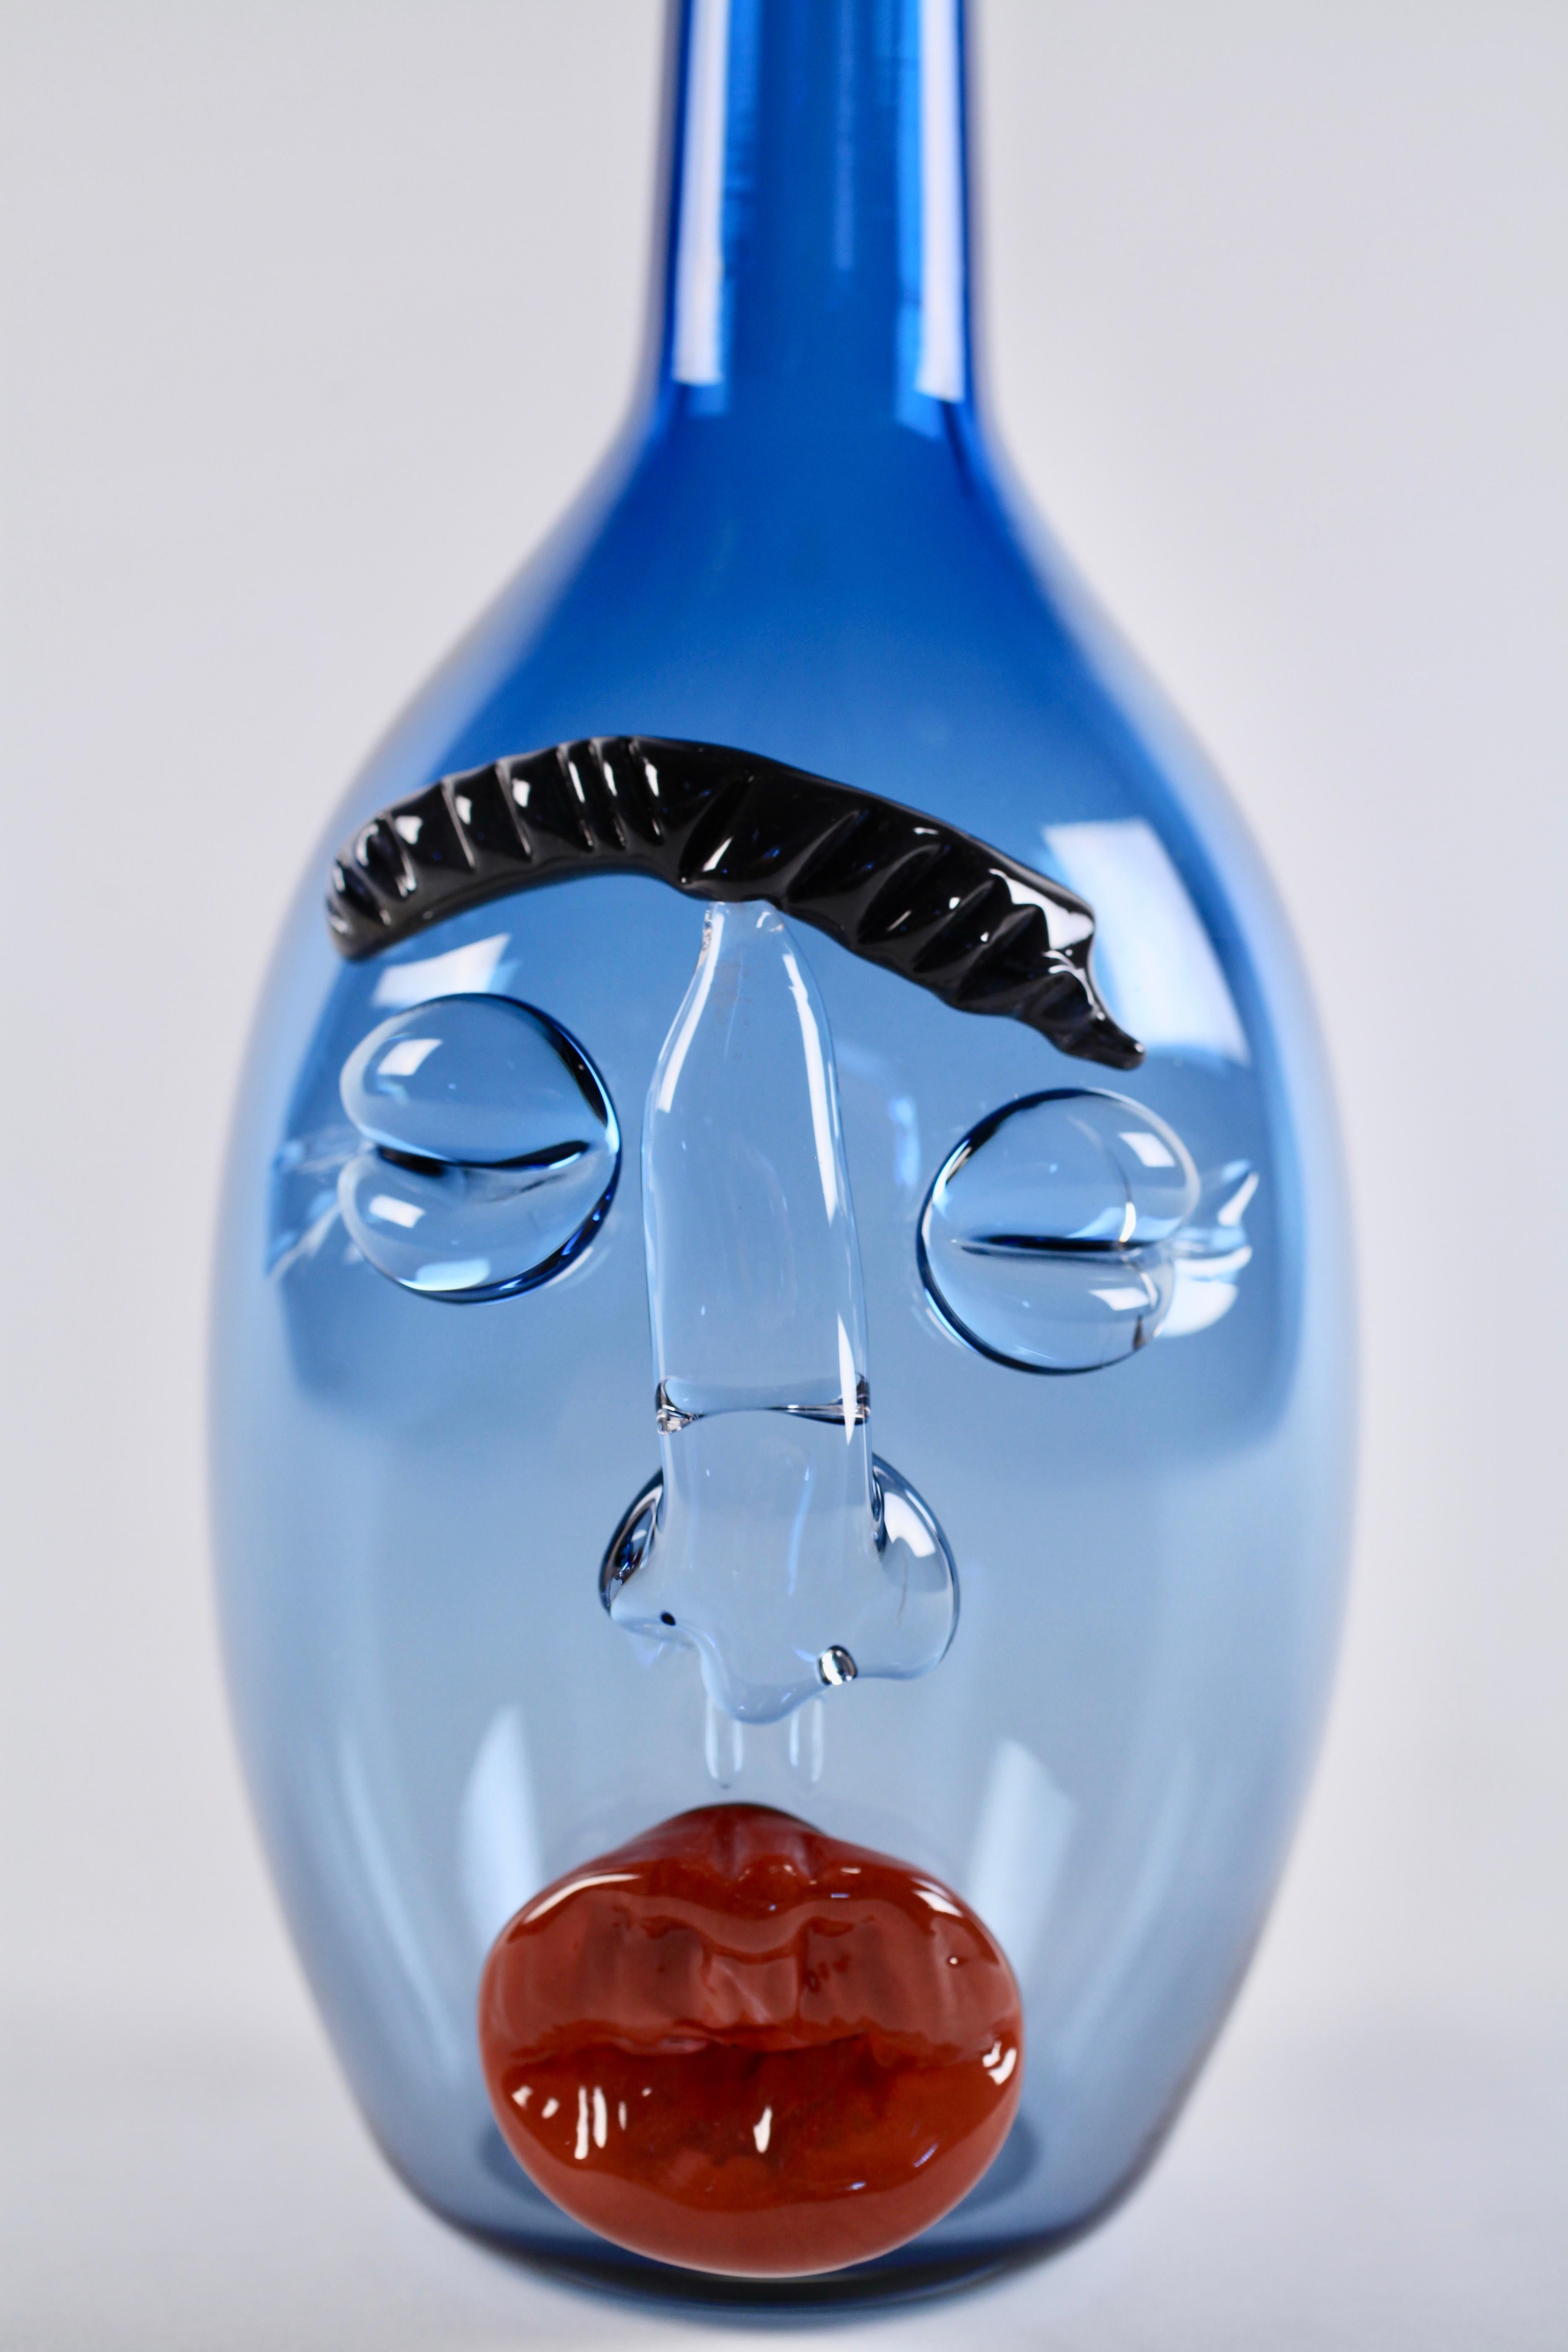 Hand blown and hot sculpted glass, this steel blue Bottle-head vessel by Elizabeth Lyons is both playful and sophisticated, blooming with a personality all its own. Elizabeth makes these sculptural hand blown bottles in her Rochester, NY studio.